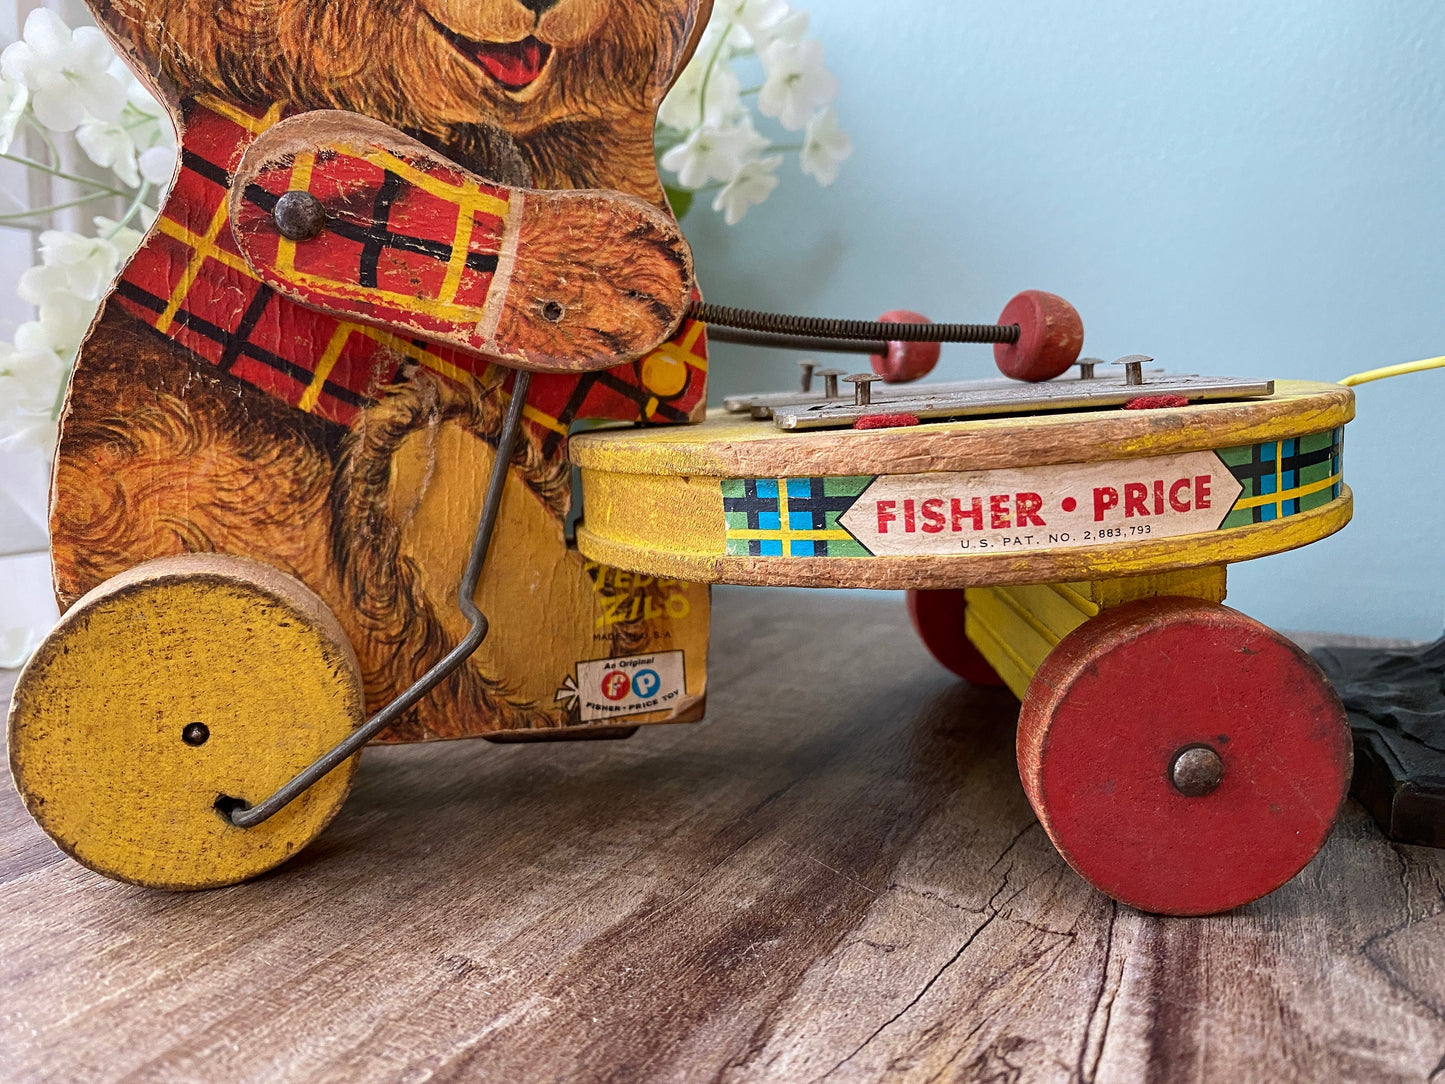 Vintage Fisher Price Teddy Zilo Wood Pull Toy